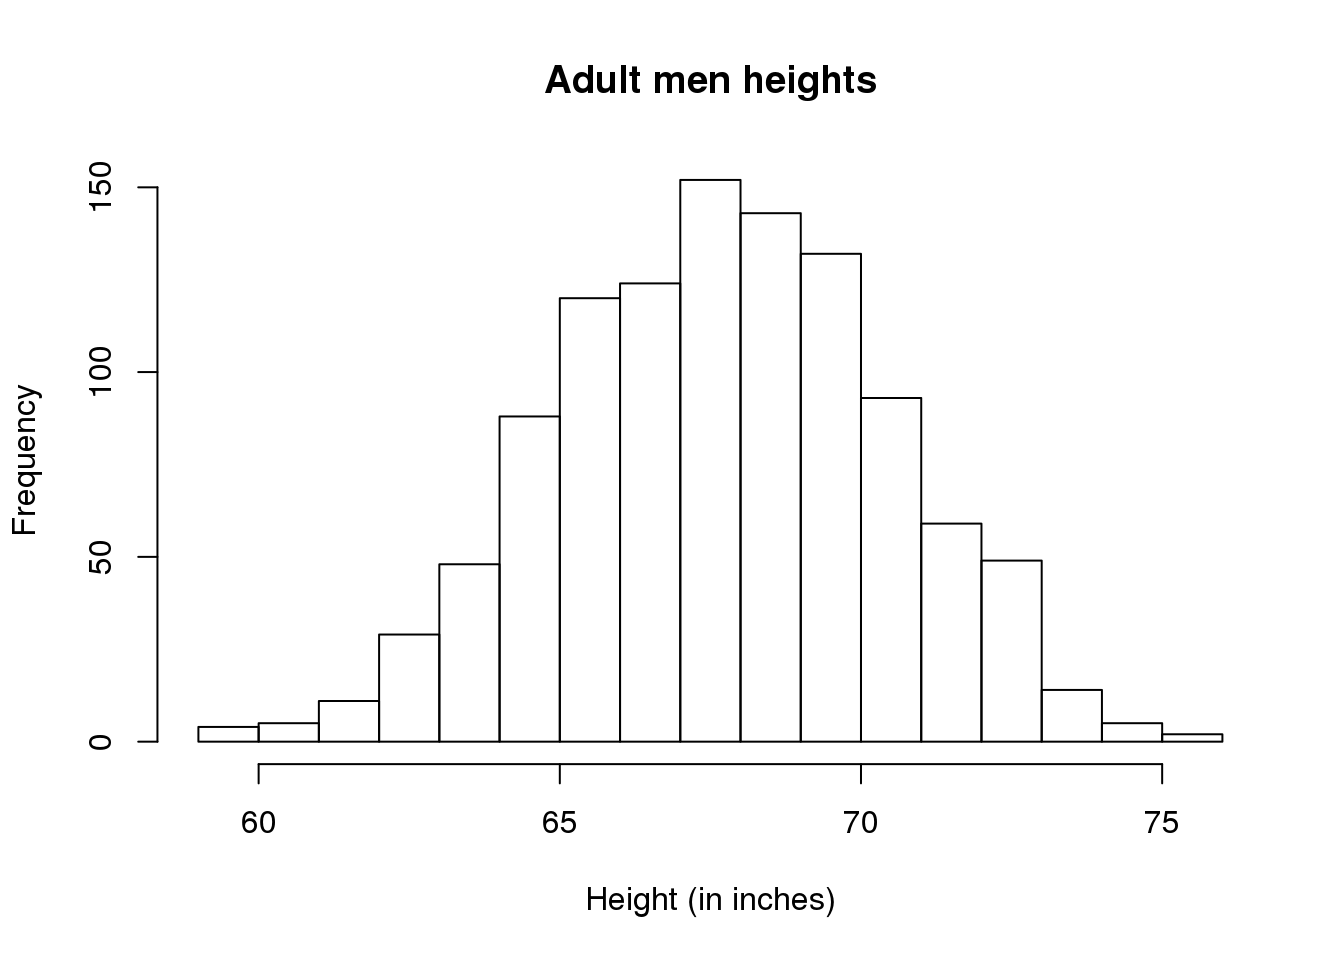 Histogram for heights.